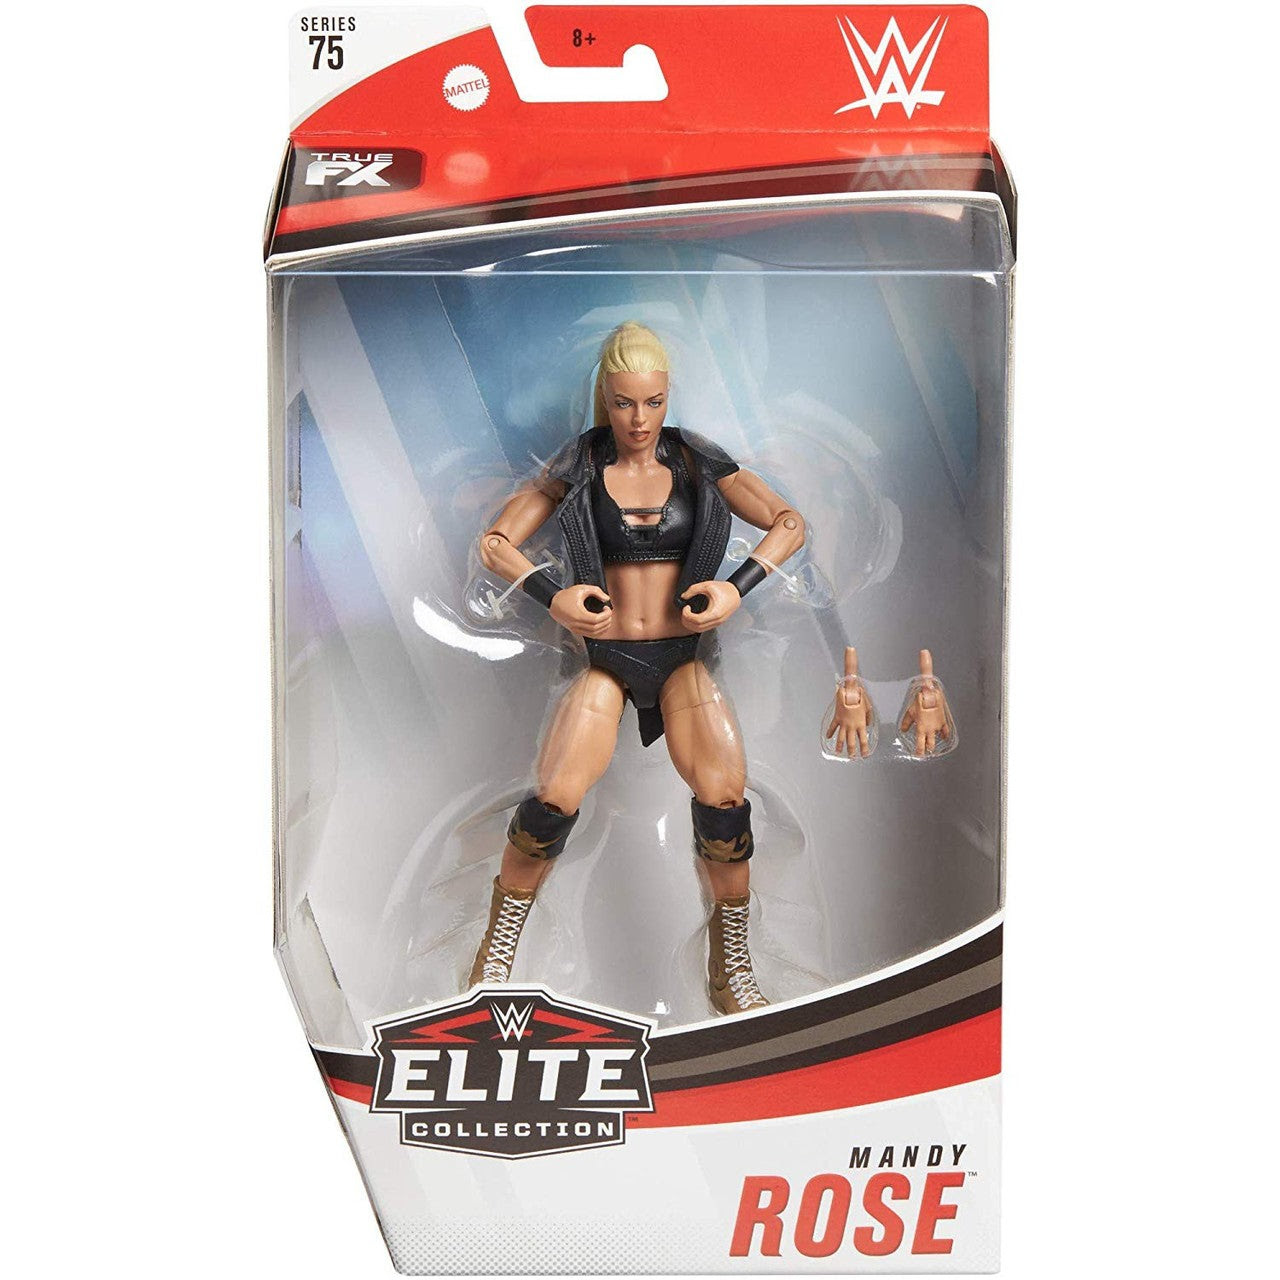 Image of WWE Elite Collection Series 75 - Mandy Rose